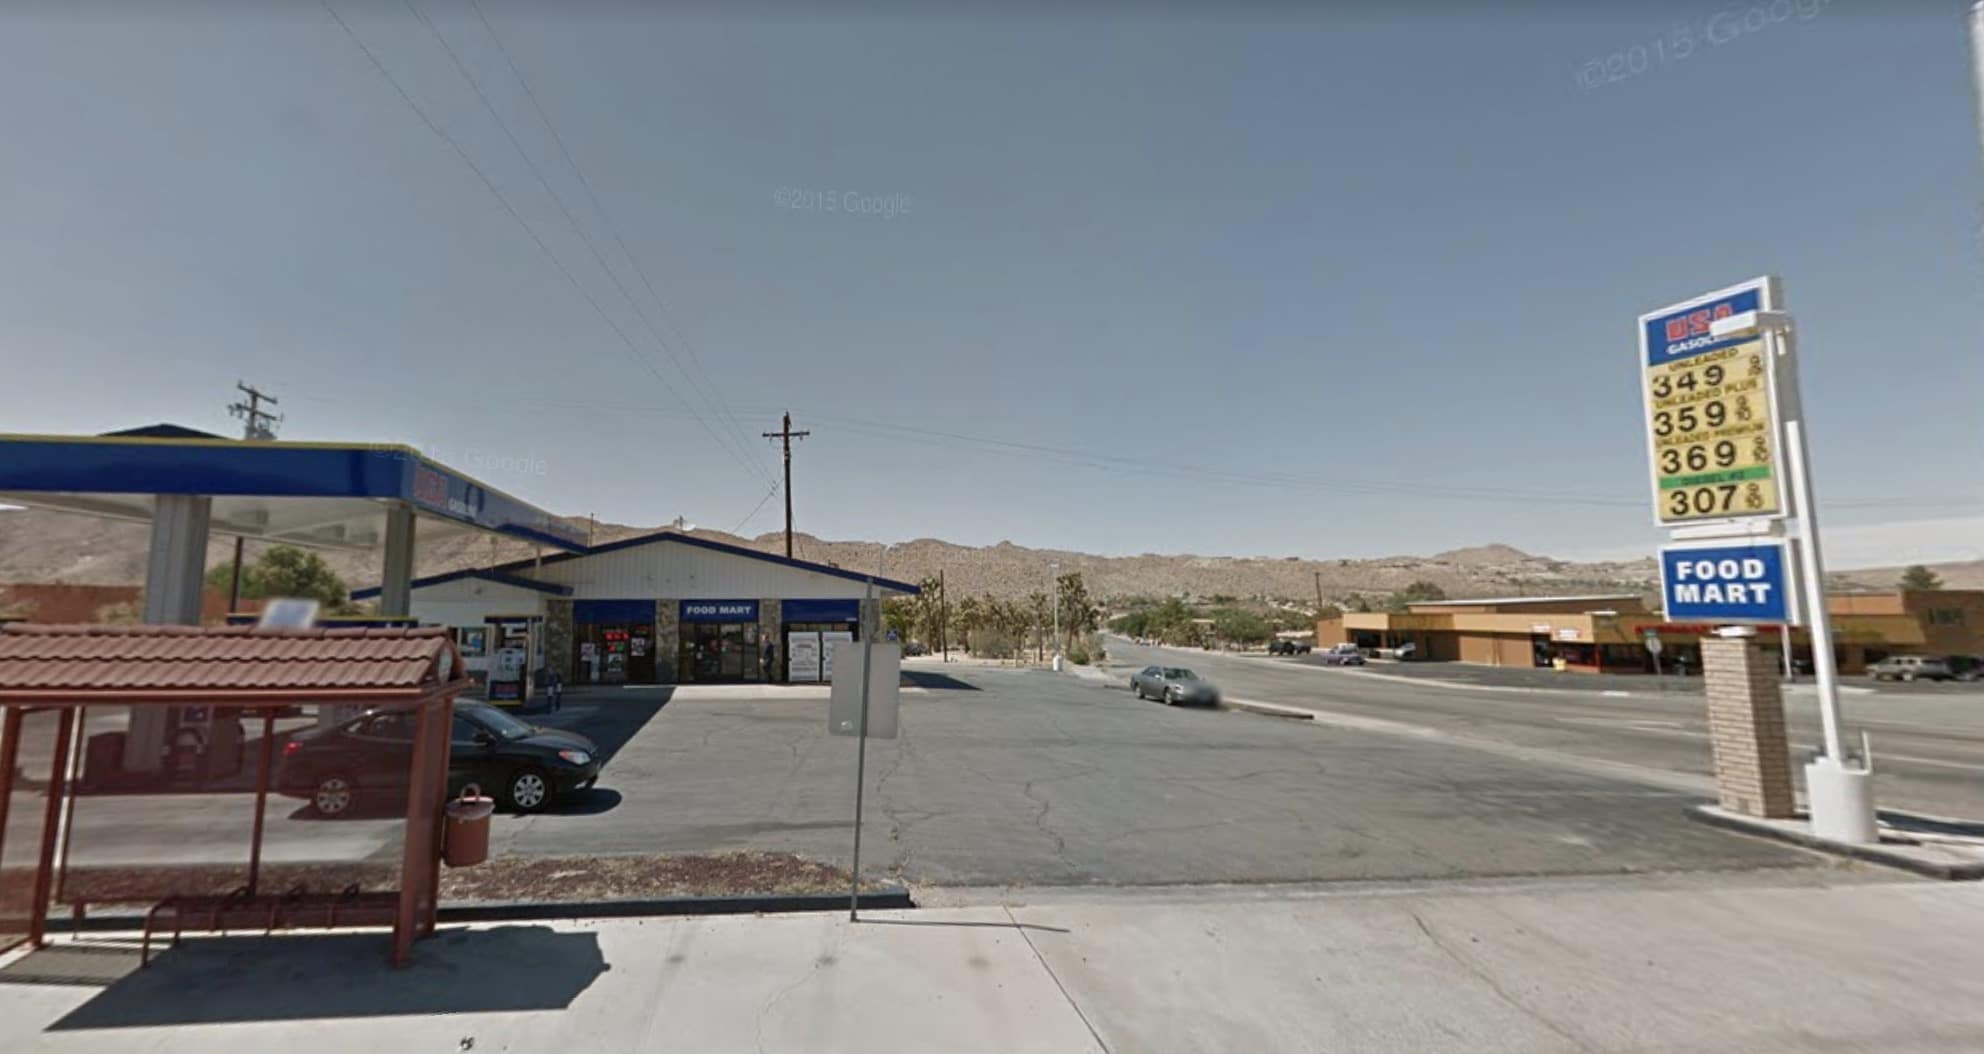 1 dead, 1 injured following shooting in Yucca Valley | Cactus Hugs1984 x 1054